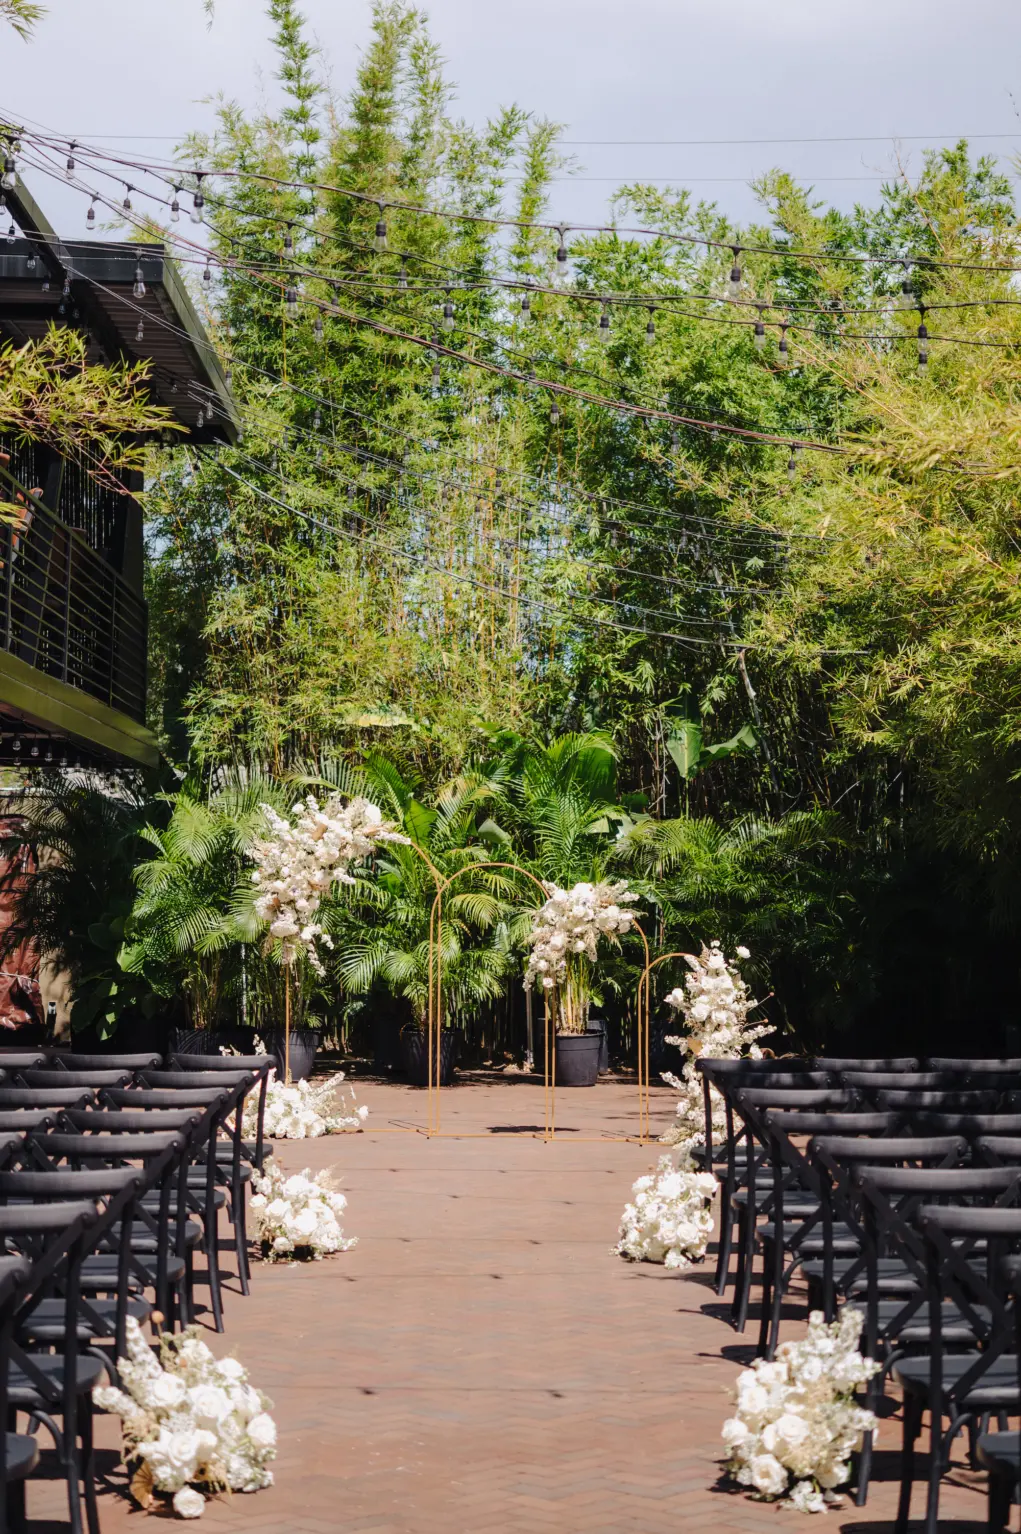 Modern Outdoor Courtyard Wedding Ideas with Black Chairs and White Ceremony Aisle Flowers | Downtown St Pete NOVA 535 Wedding Venue | Florist Marigold Flower Co